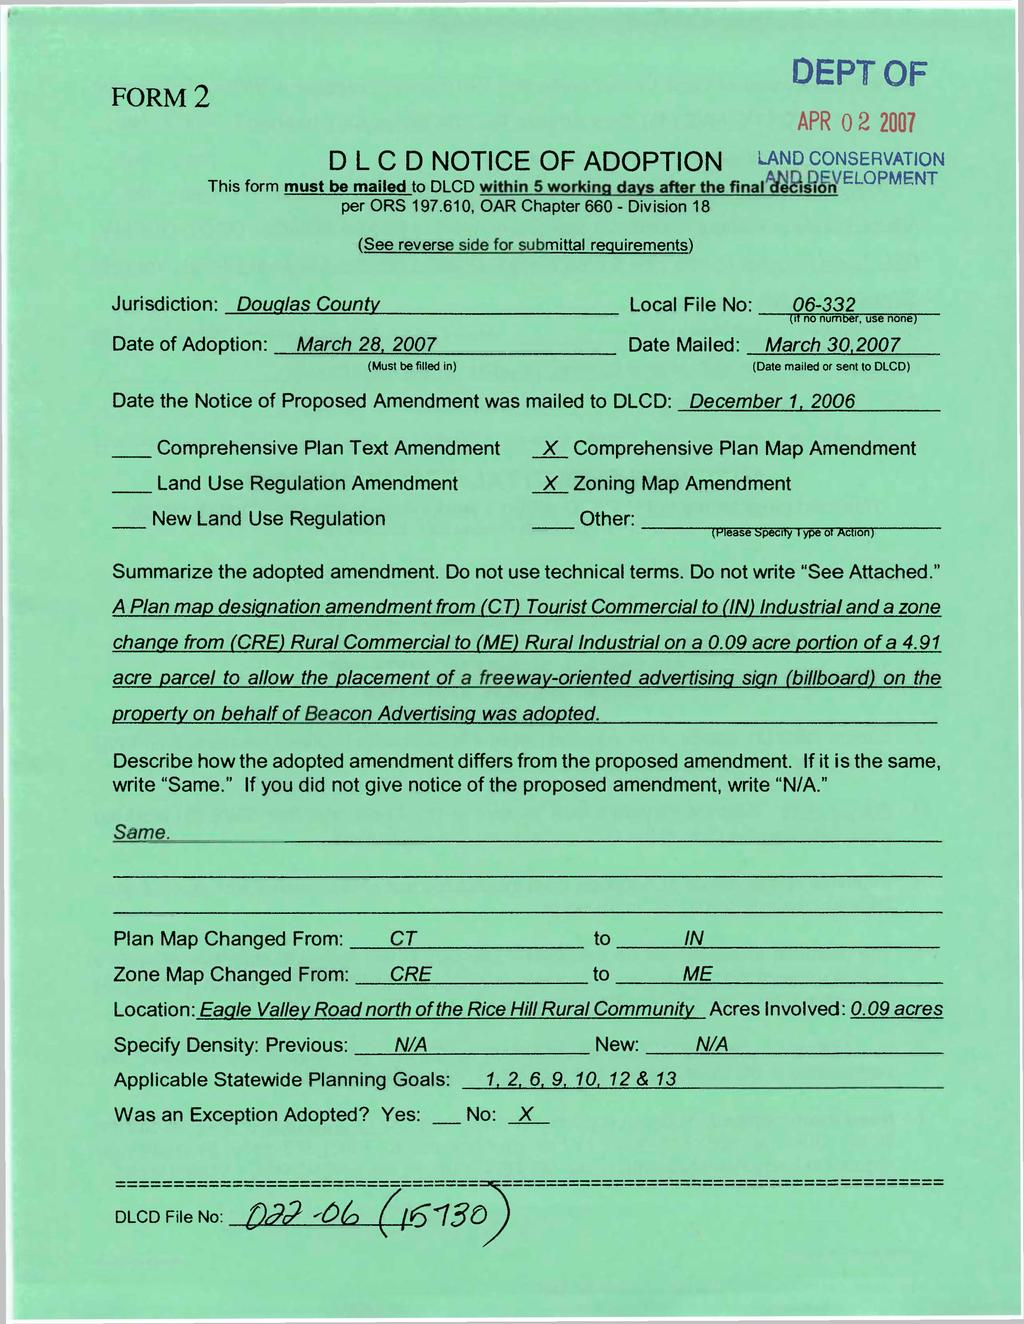 DEPT OF FORM 2 APR 0 2 2007 D L C D NOTICE OF ADOPTION LAND ISERVATION This form must be mailed to DLCD within 5 working days after the fmal'de^skm per ORS 197.